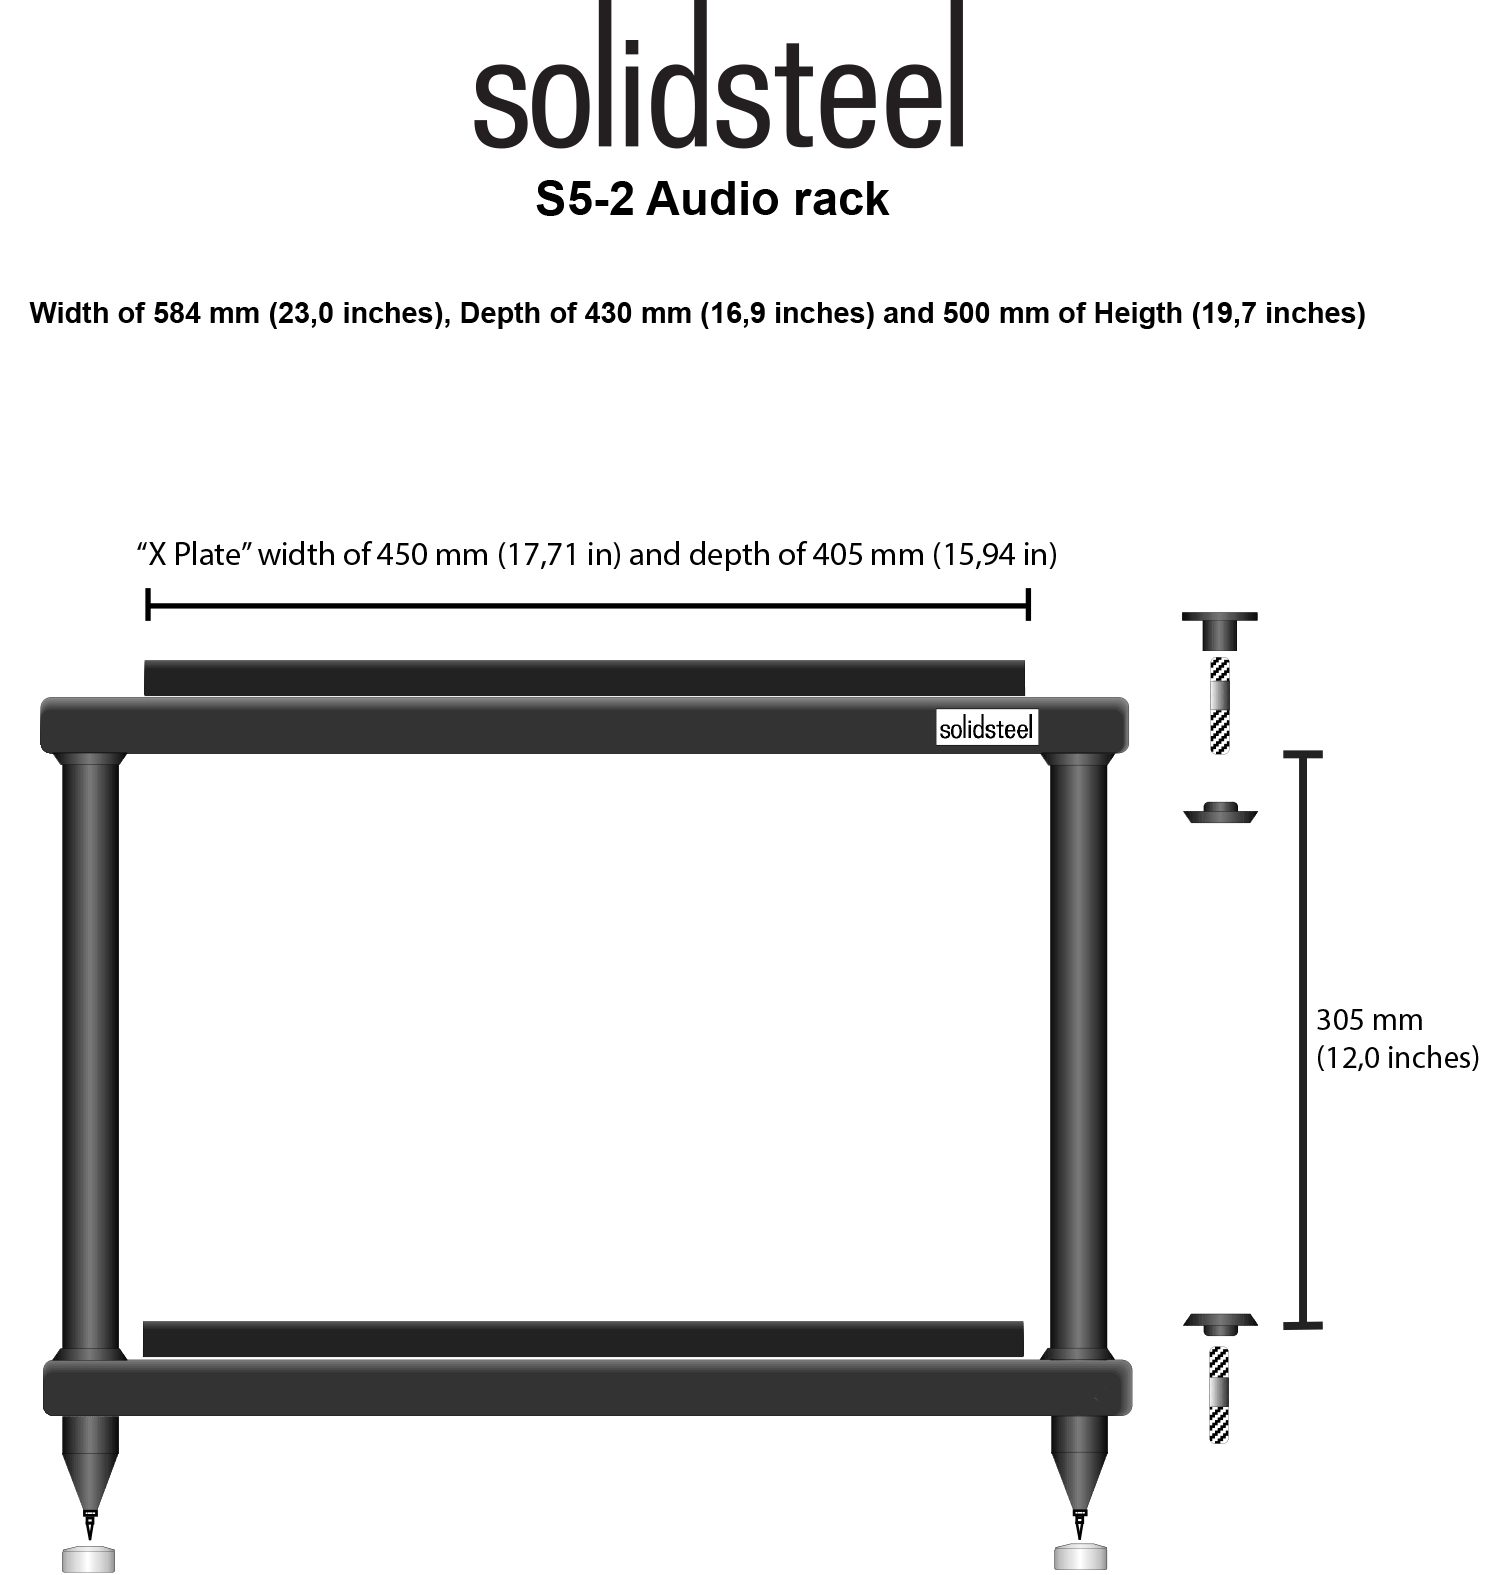 Solidsteel S5-2 dimension taille rack